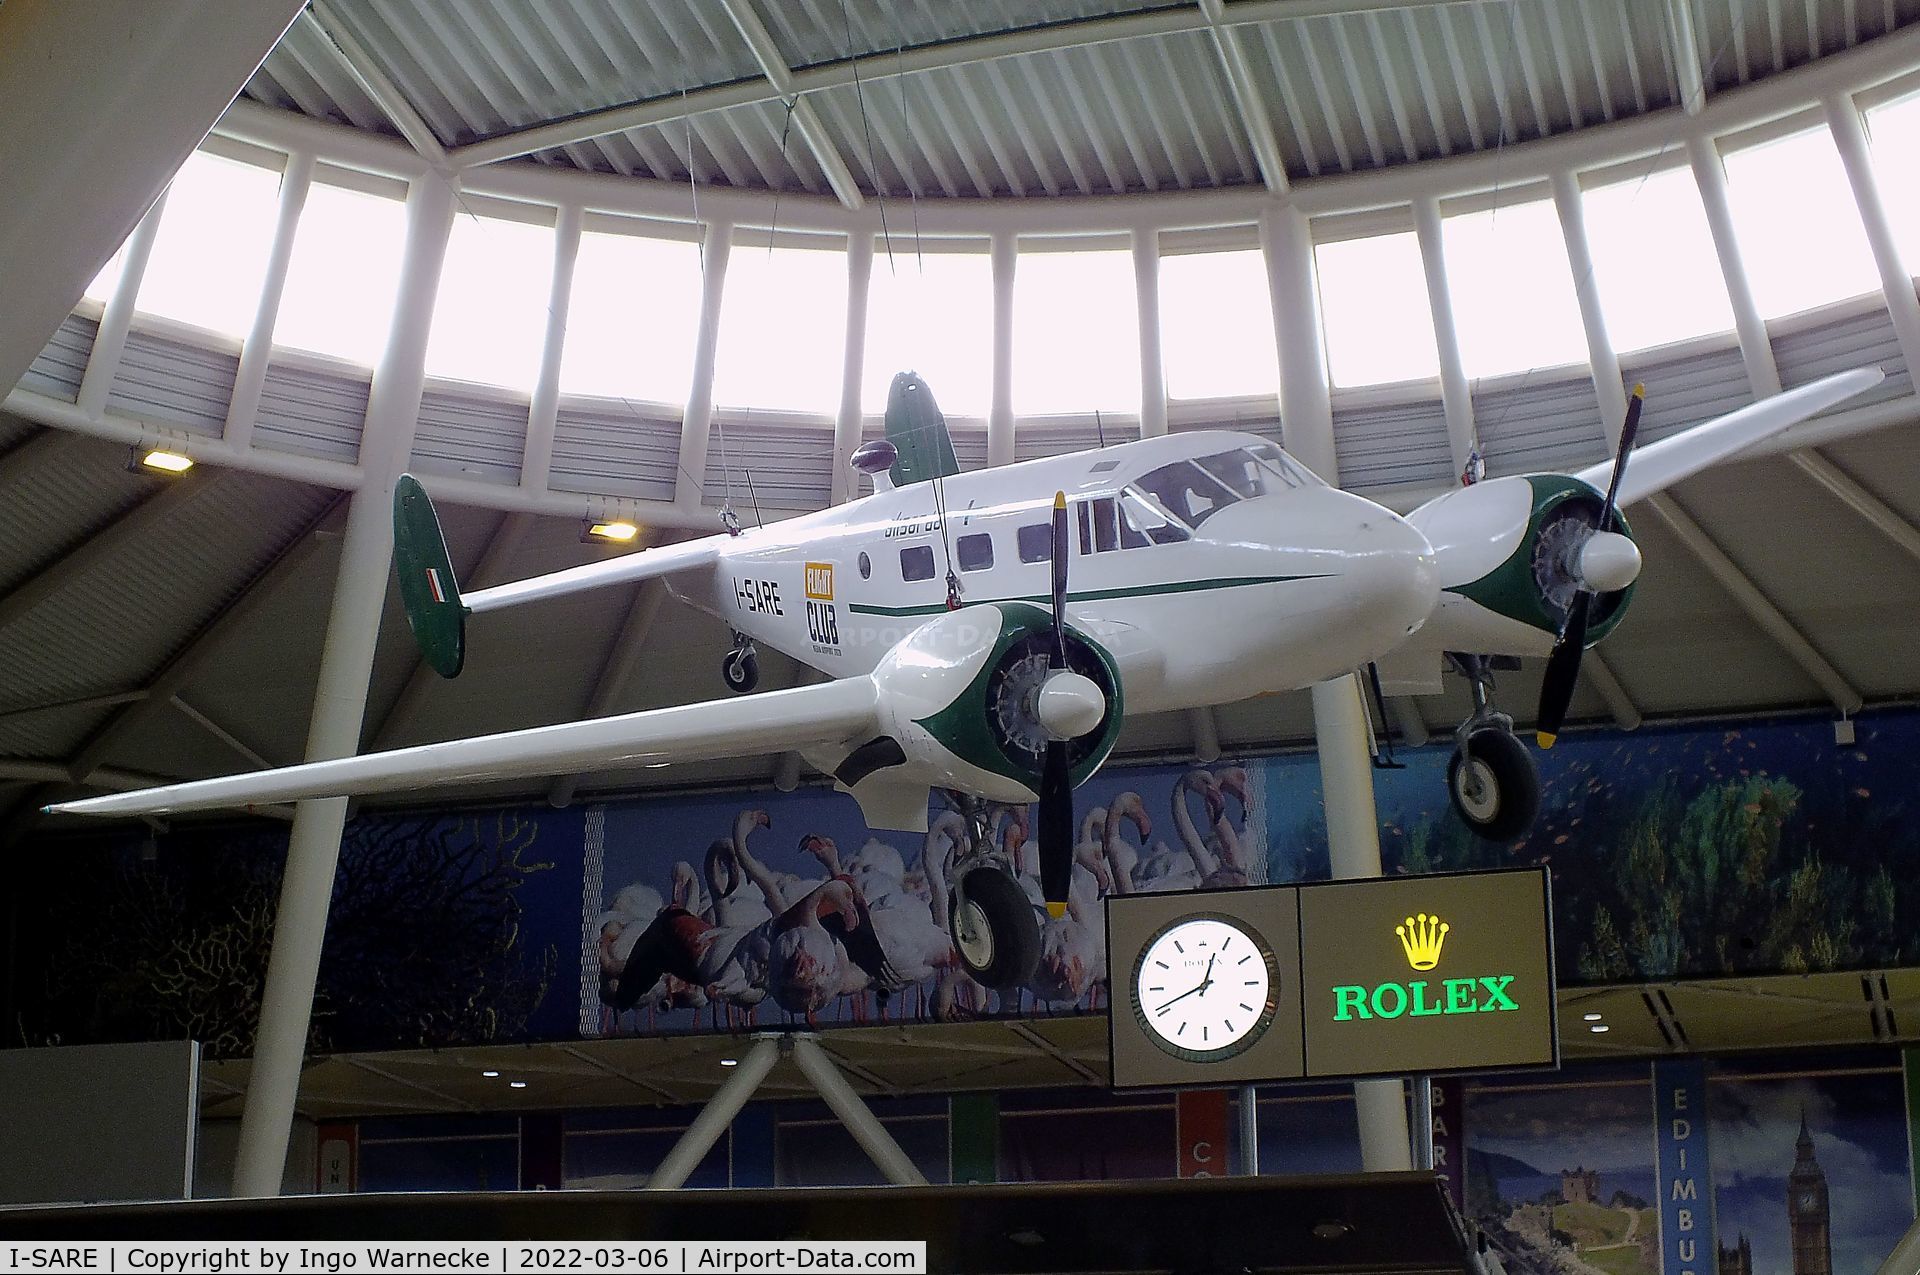 I-SARE, Beech C-45F Expeditor C/N 6668, Beechcraft C-45F Expeditor, exhibited inside the terminal at Olbia Costa Smeralda Airport, Olbia